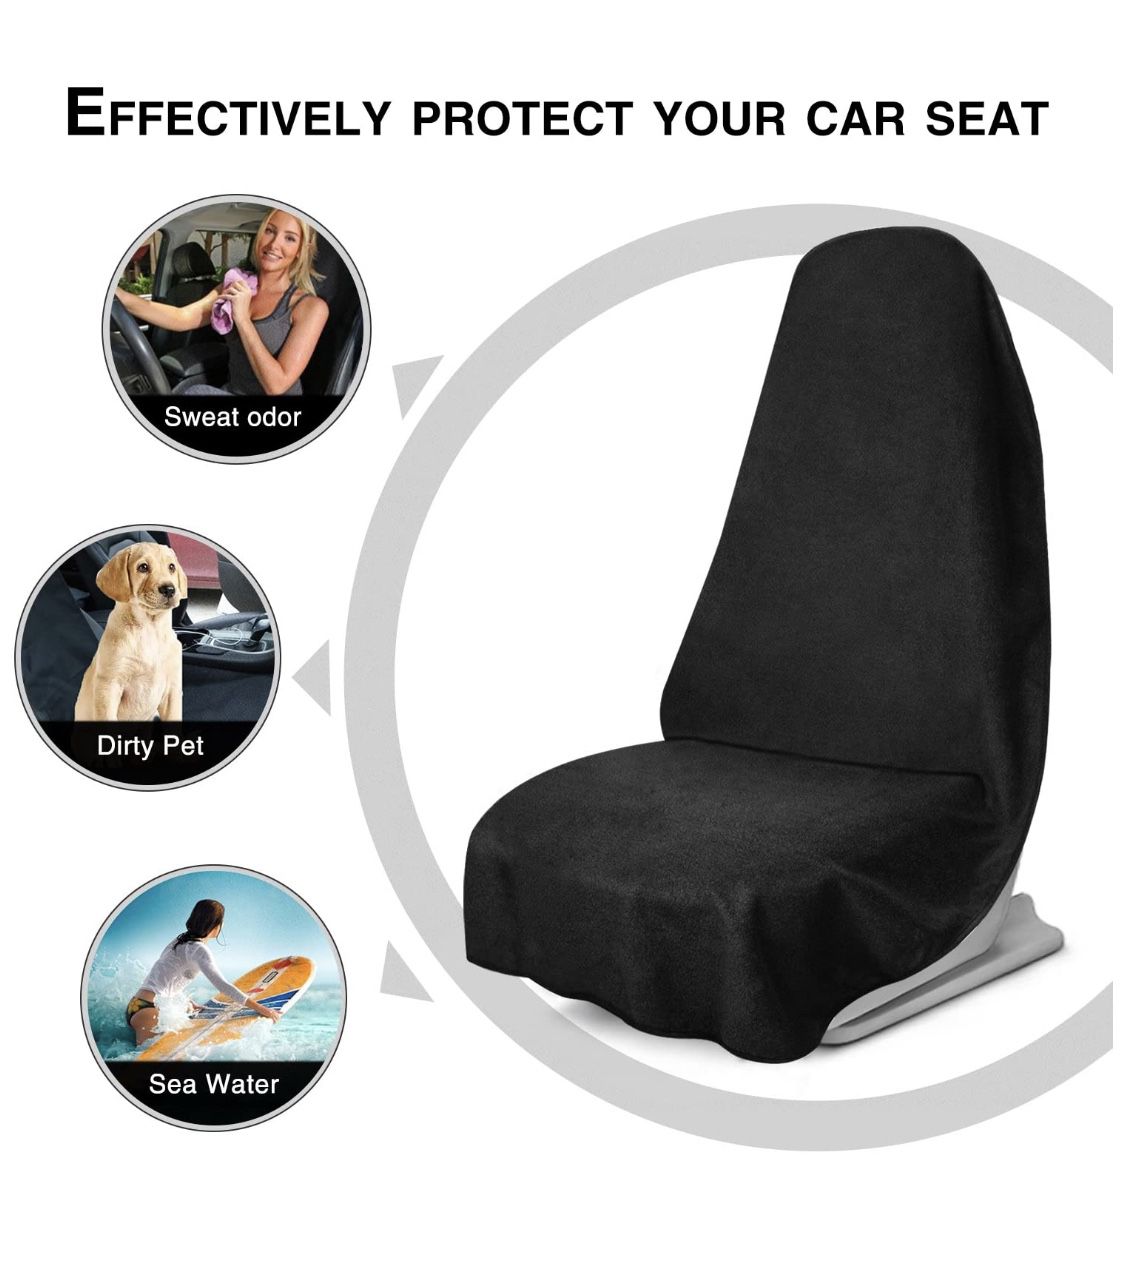 NEW Post-workout Car Seat Protector